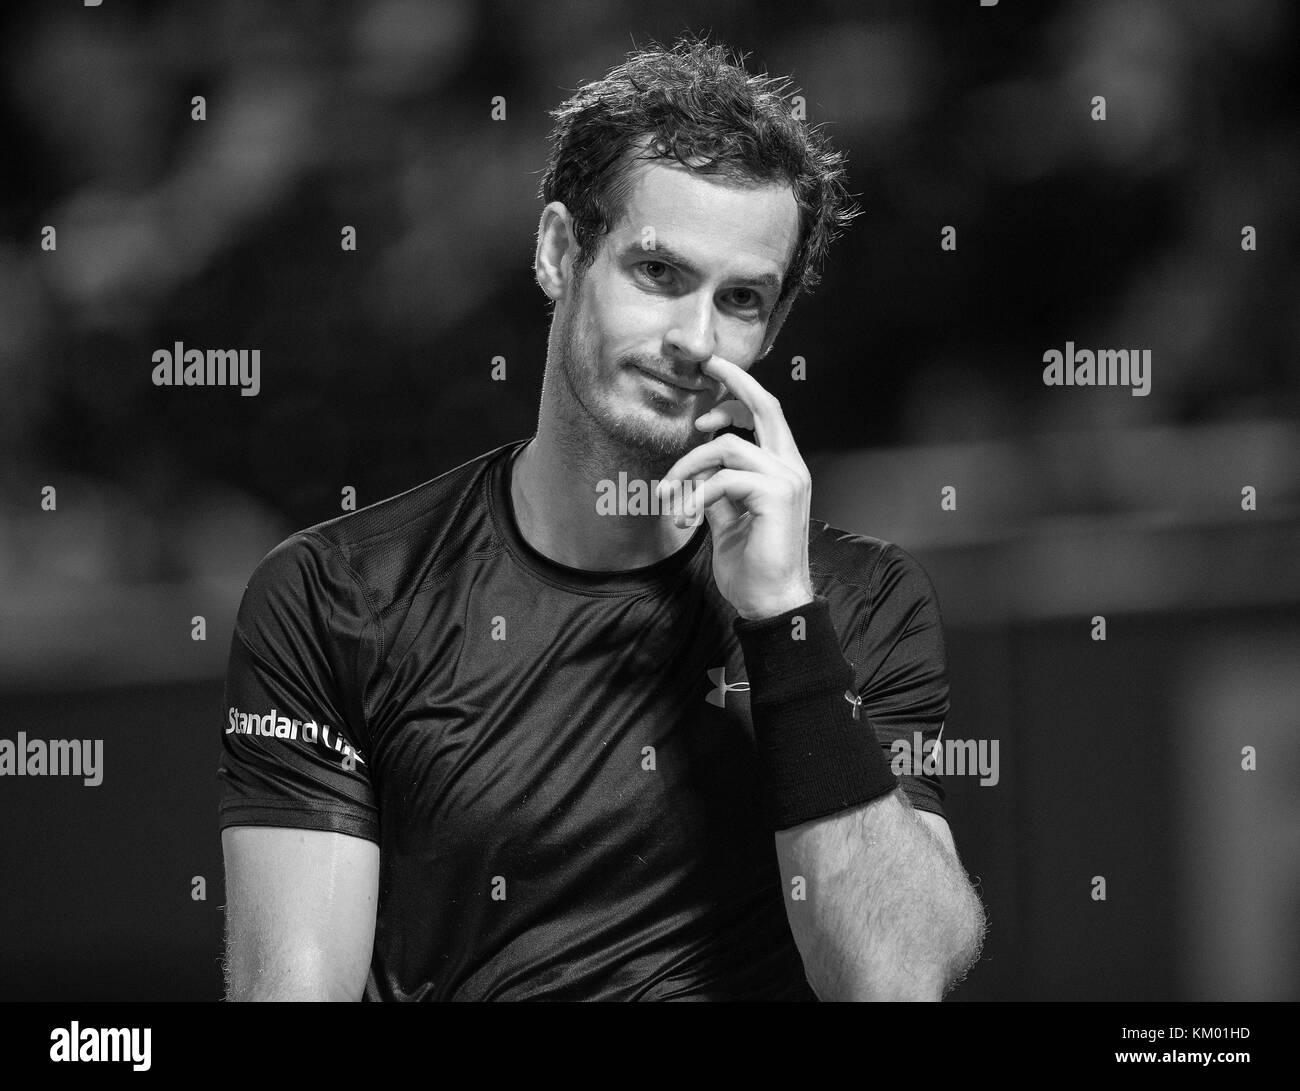 KEY BISCAYNE, FL - MARCH 26:  ANDY MURRAY on Day 6 of the Miami Open presented by Itau at Crandon Park Tennis Center on March 26, 2016 in Key Biscayne, Florida   People:  ANDY MURRAY Stock Photo